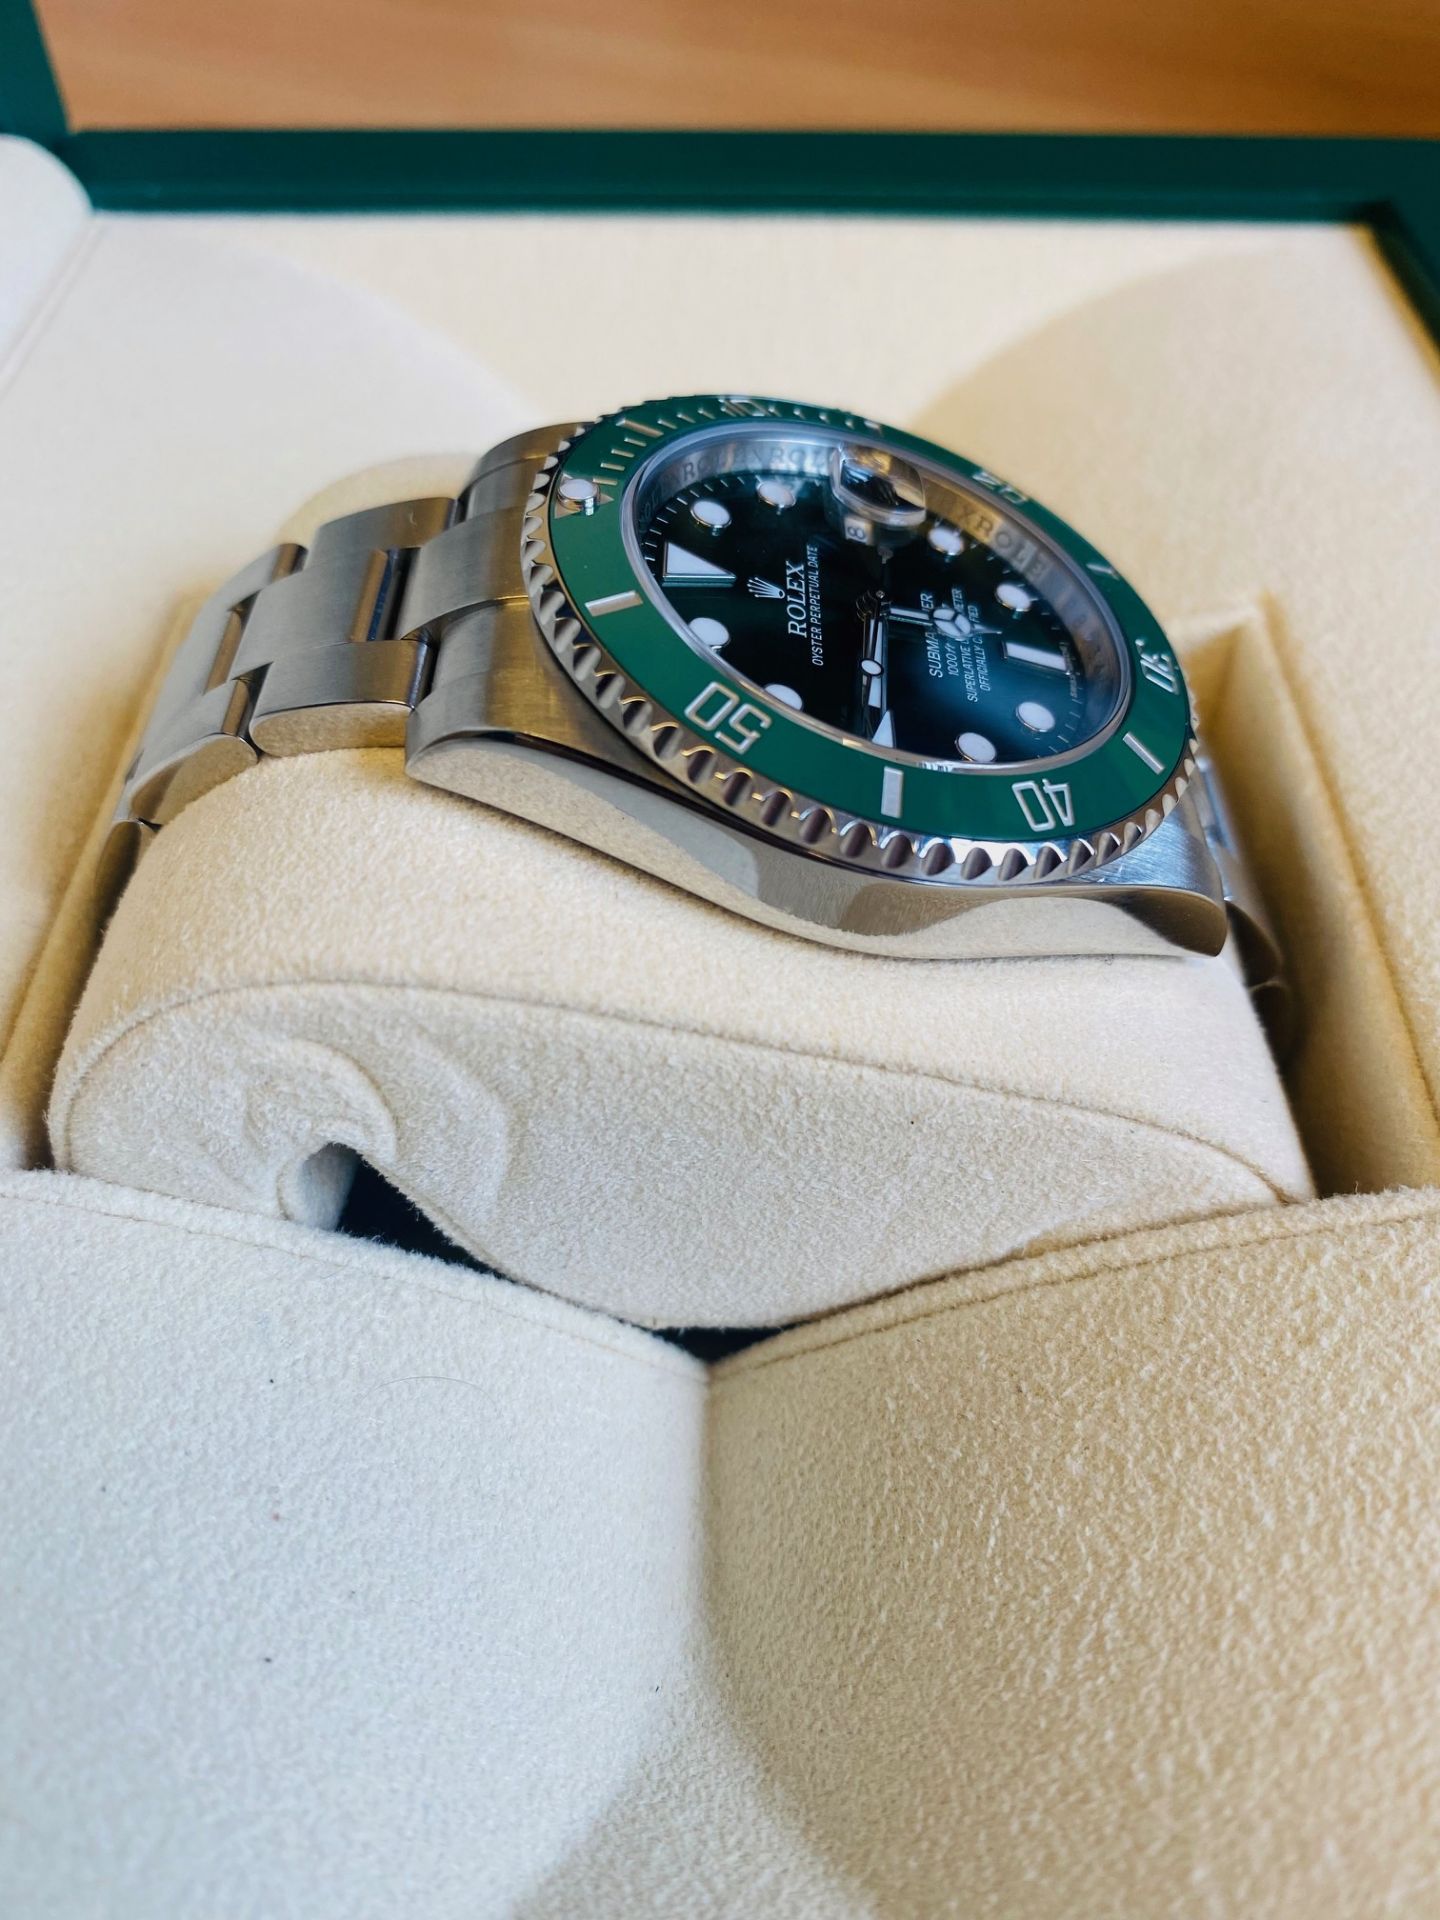 No VAT Gents Rolex Oyster Perpetual Date Submariner "Hulk" Watch - Comes With Inner And Outer Boxes - Image 5 of 7